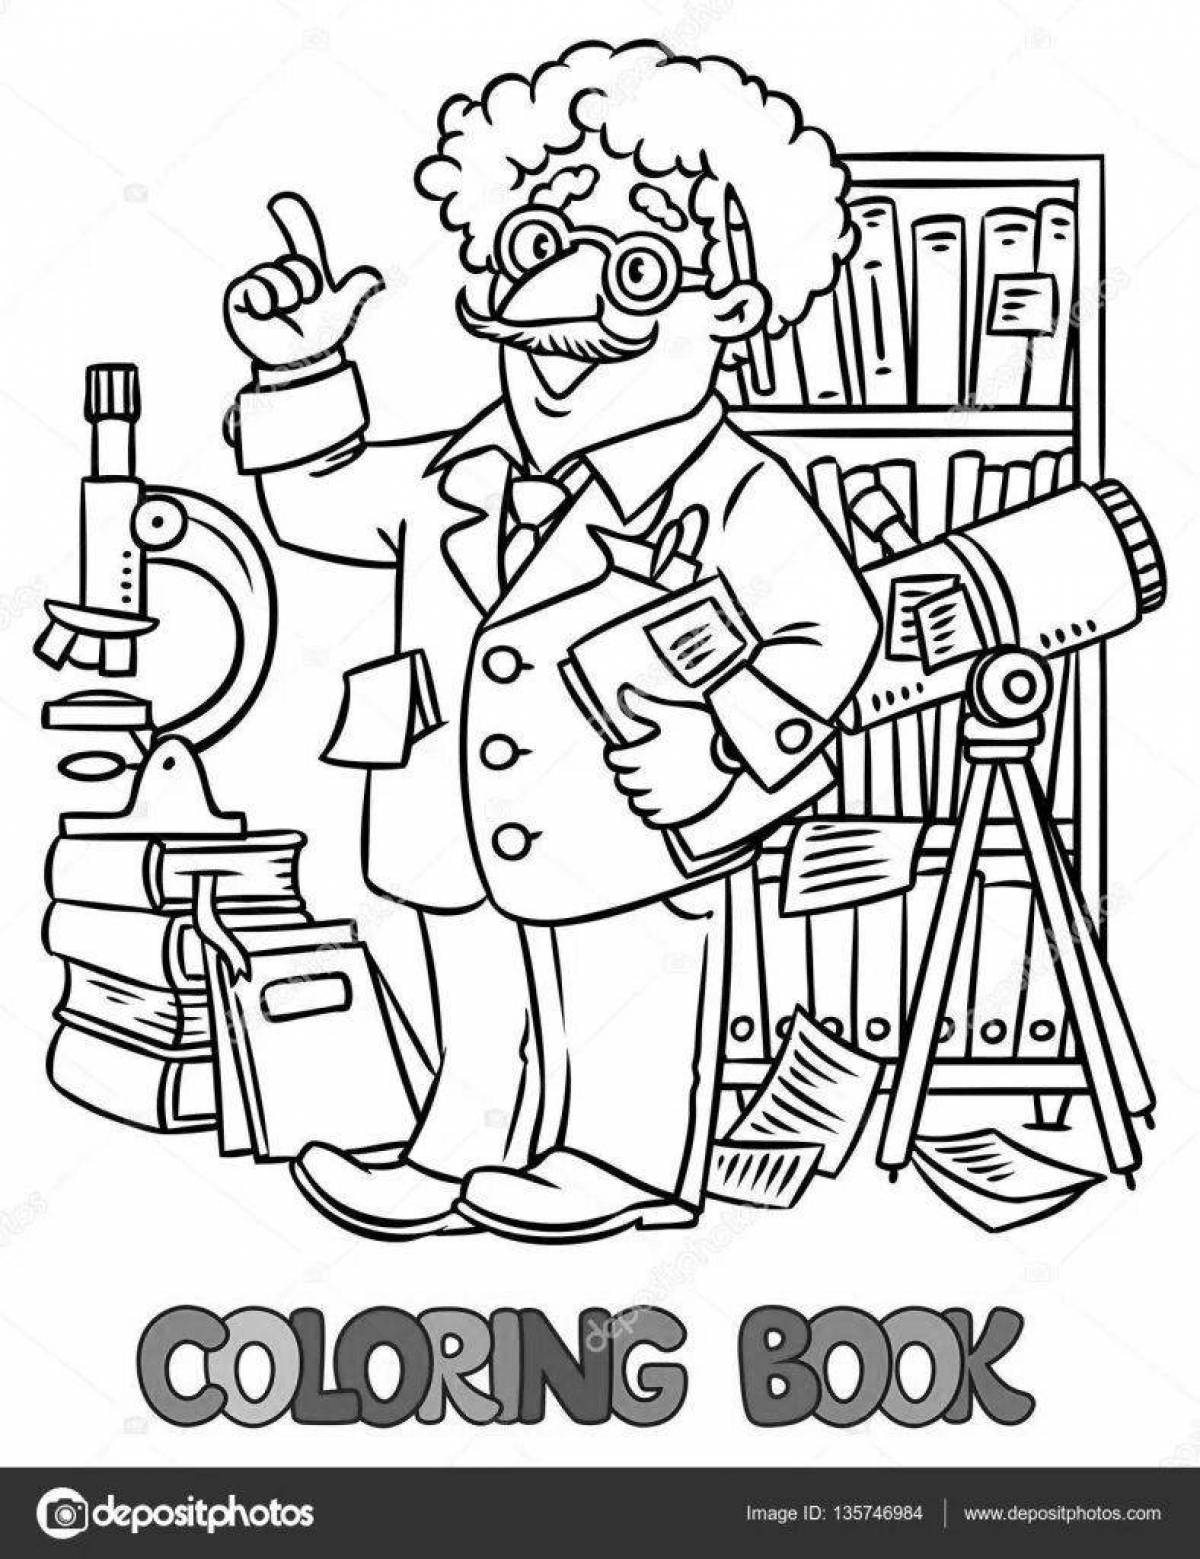 Color-zoomy children's inventions coloring book